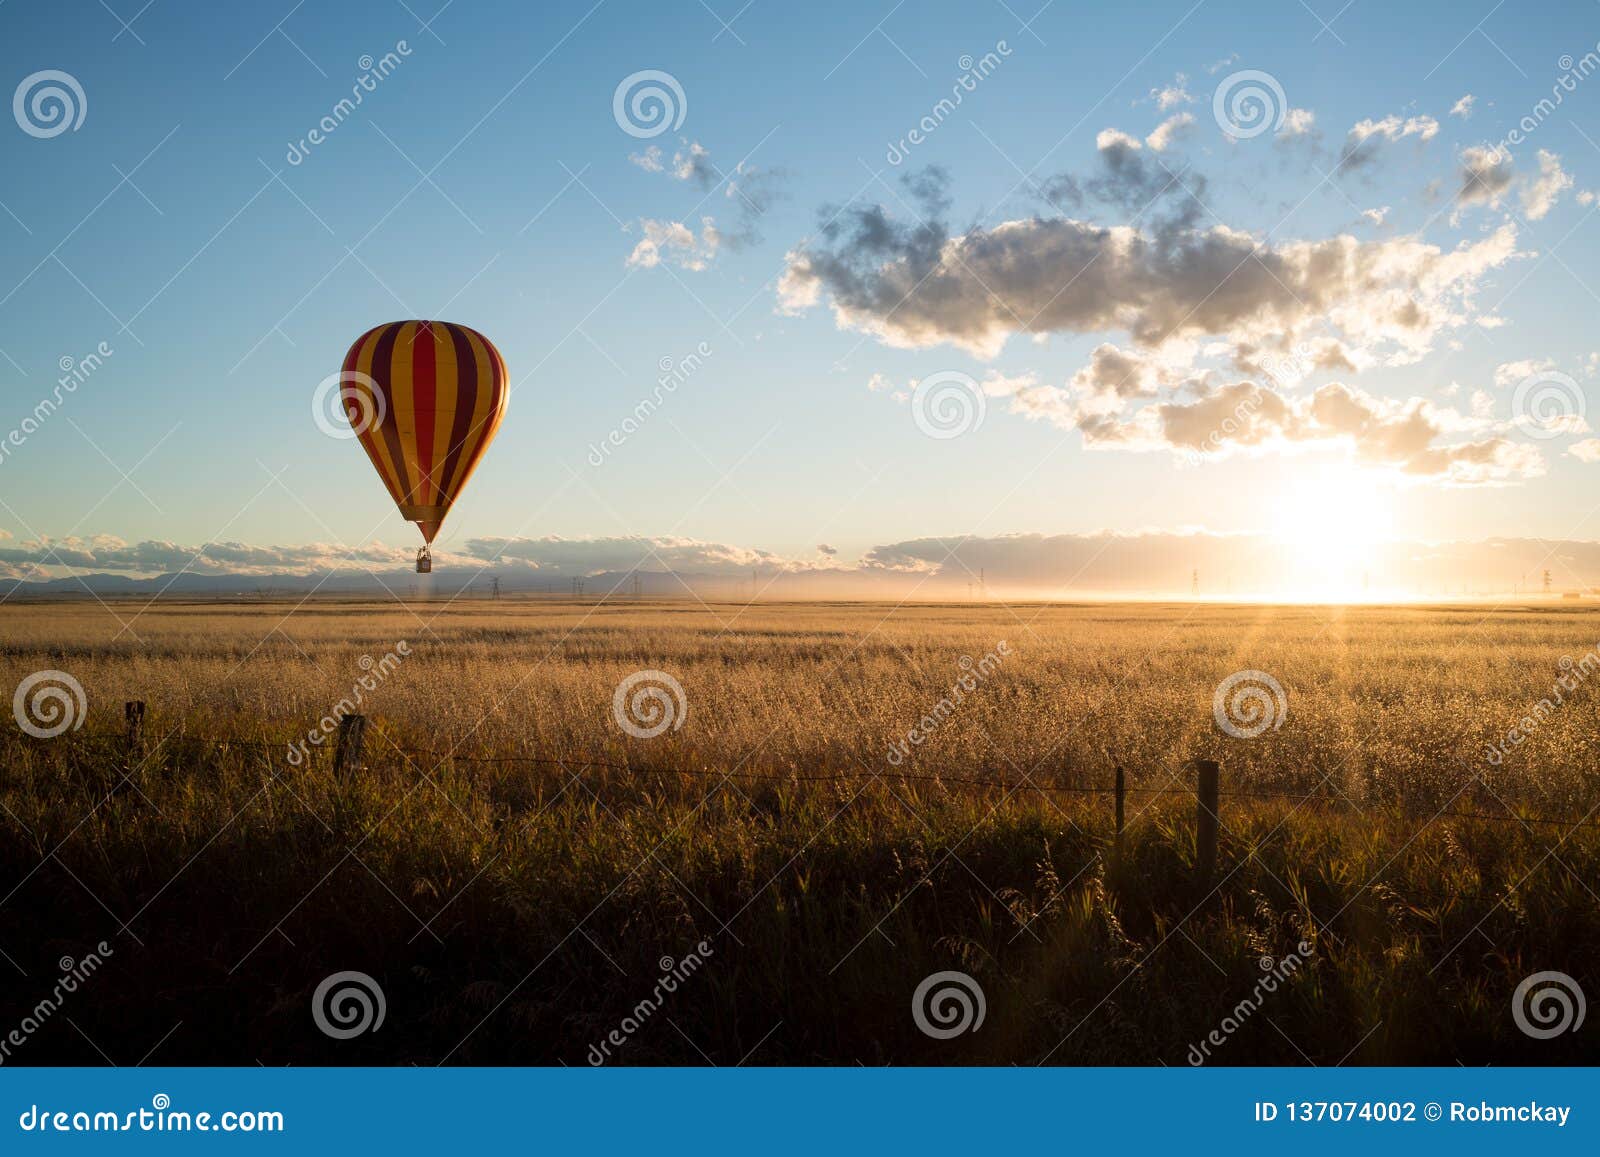 sunset and a hot air balloon lands in canola in alberta prairies